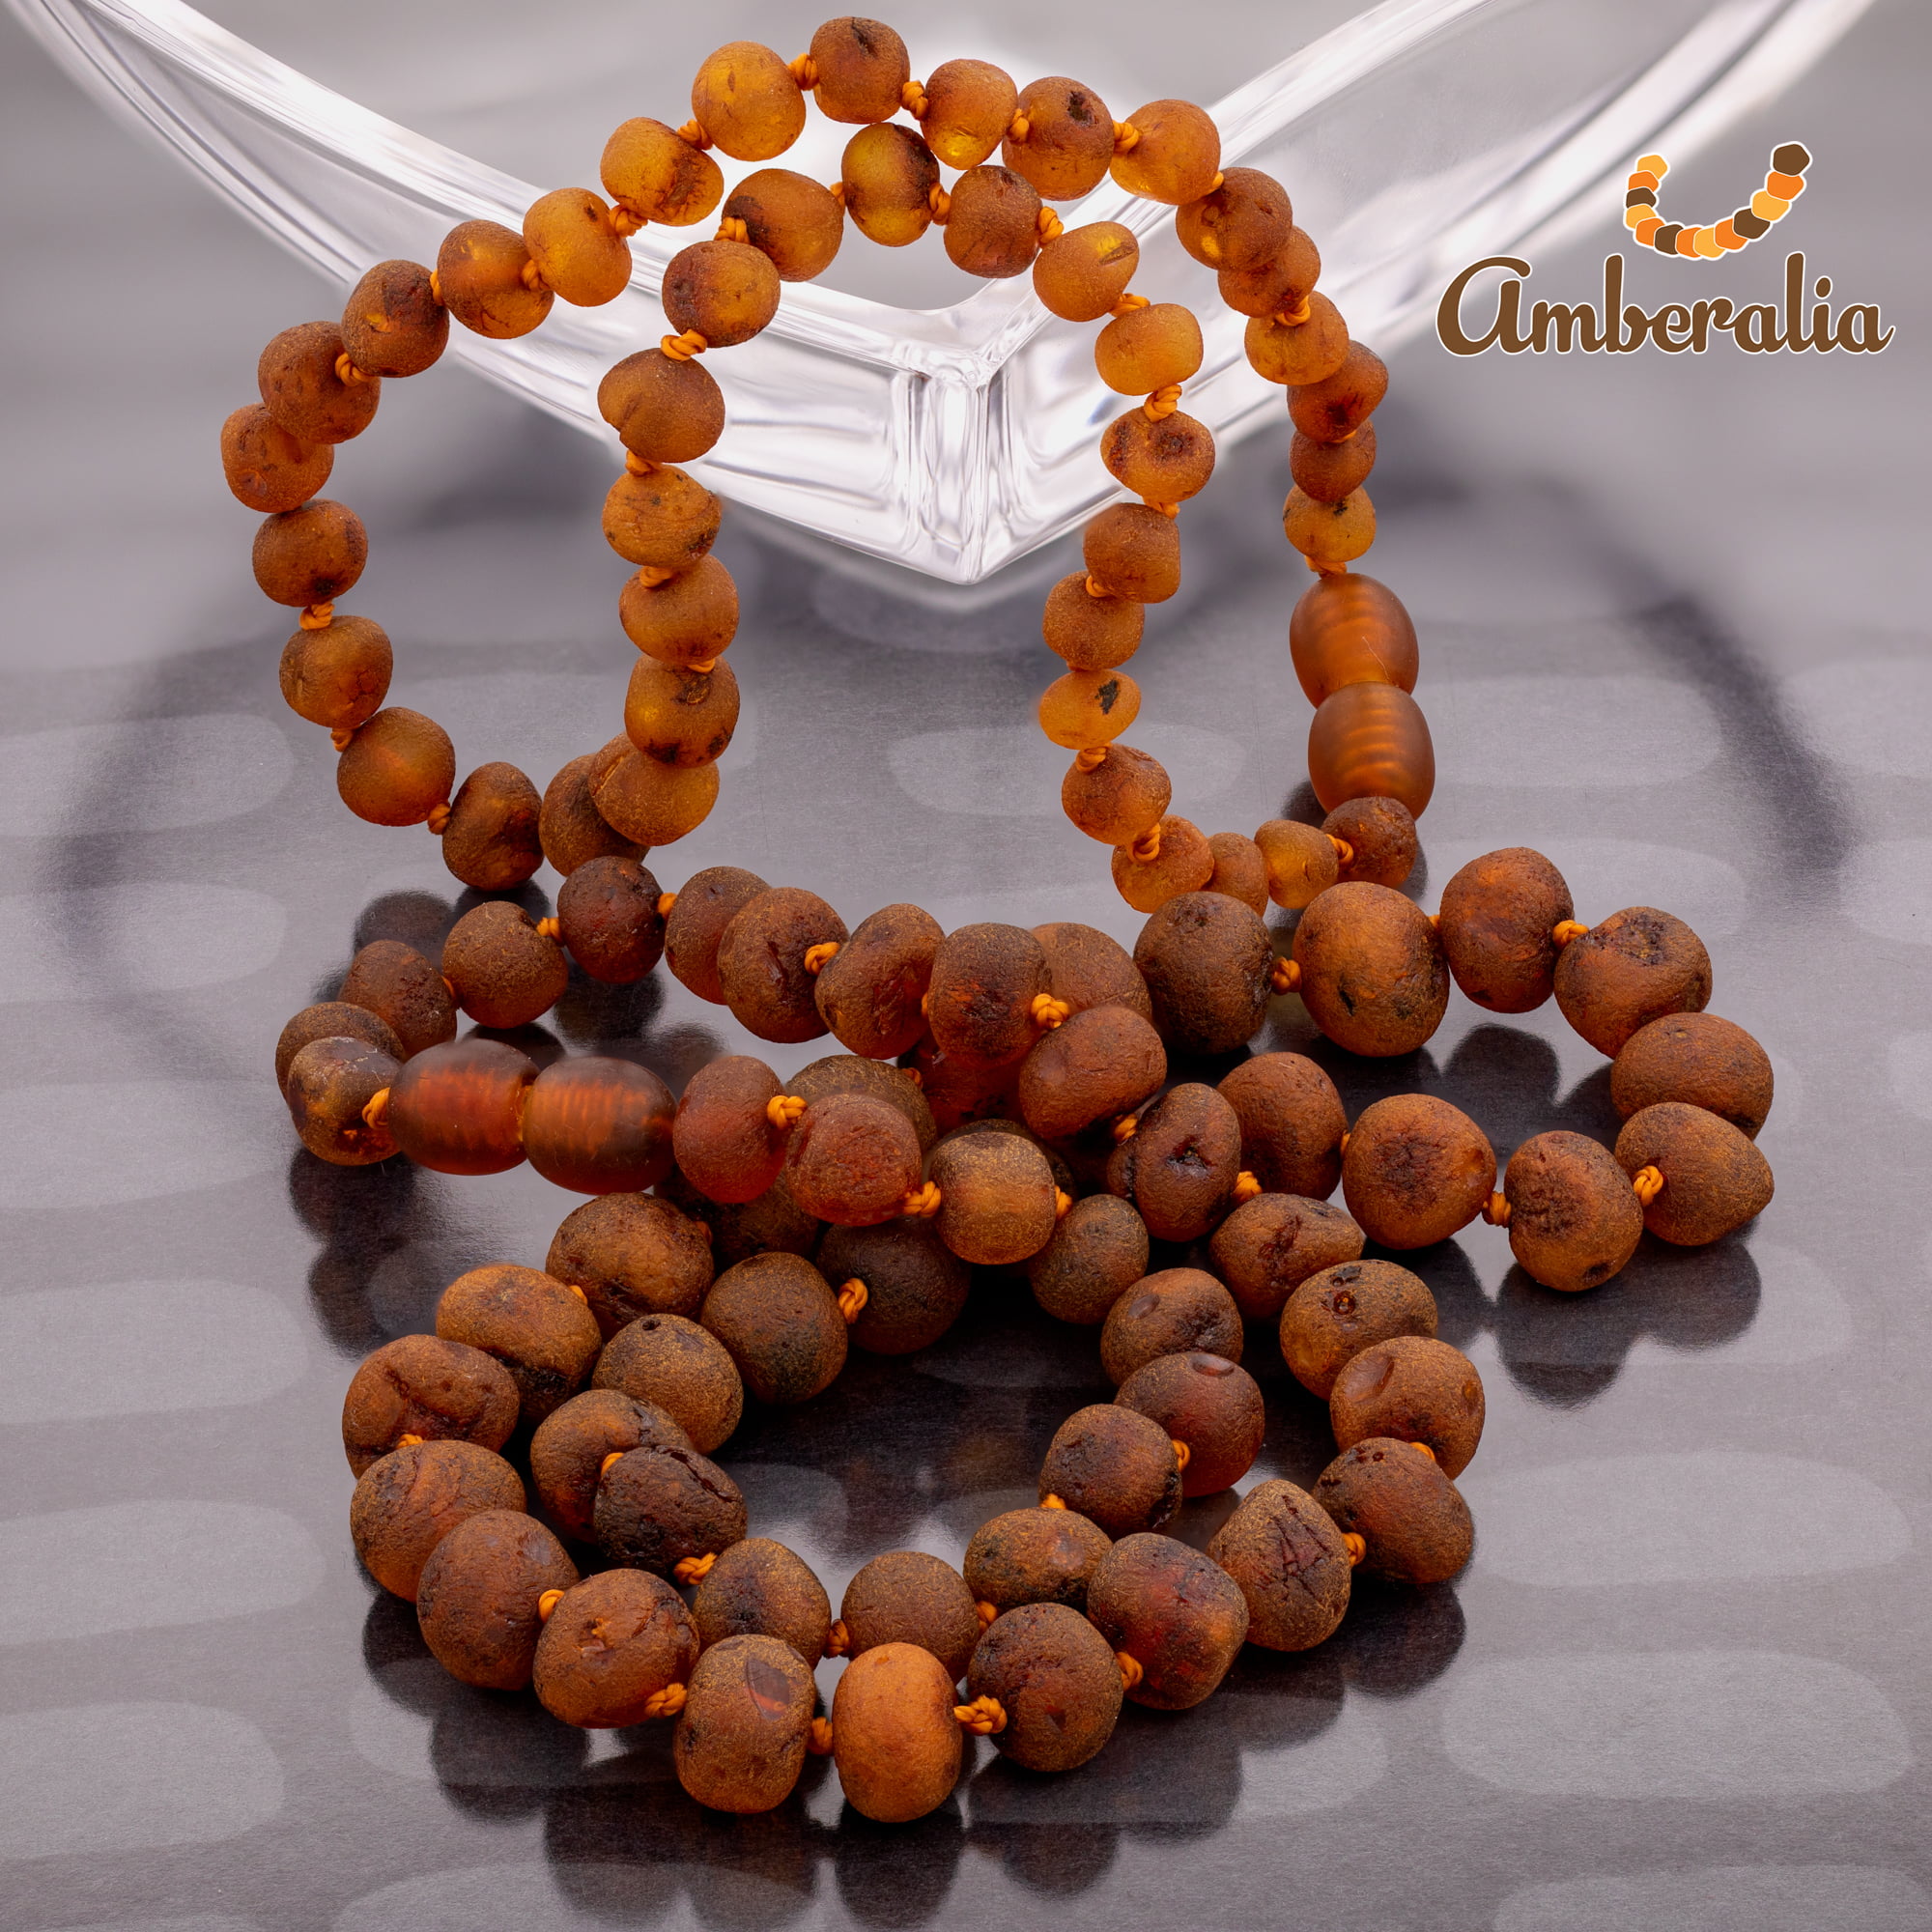 Lab-tested Boost immune System SIZES FOR EVERYBODY Amberalia knotted  Baltic Amber Necklace Certified Genuine Amber